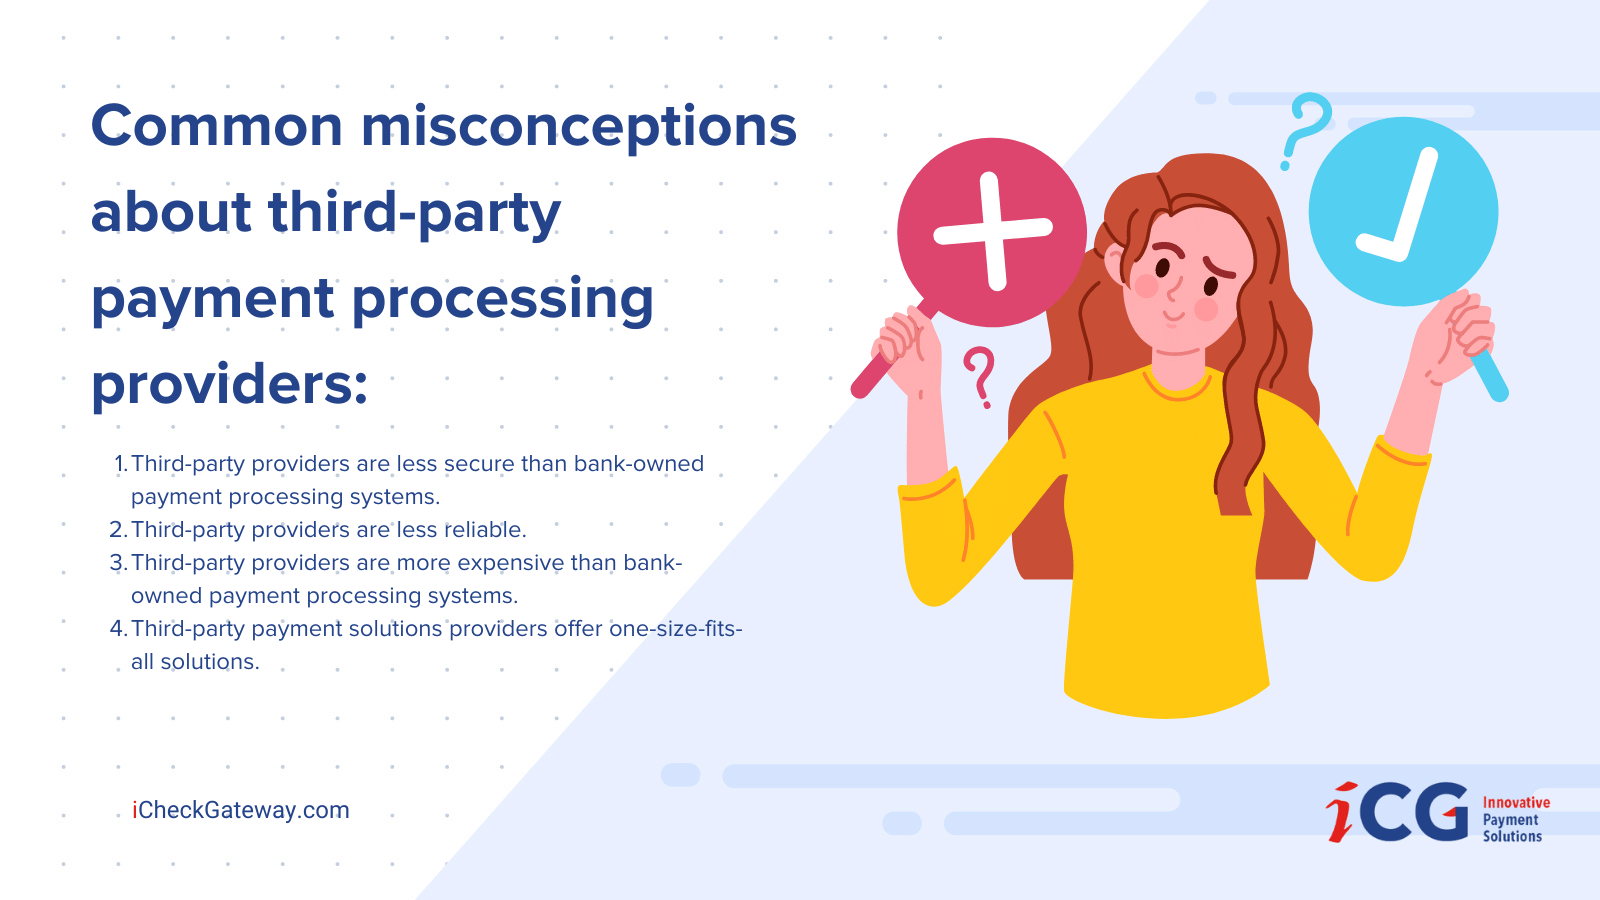 Common misconceptions about third-party payment processing providers